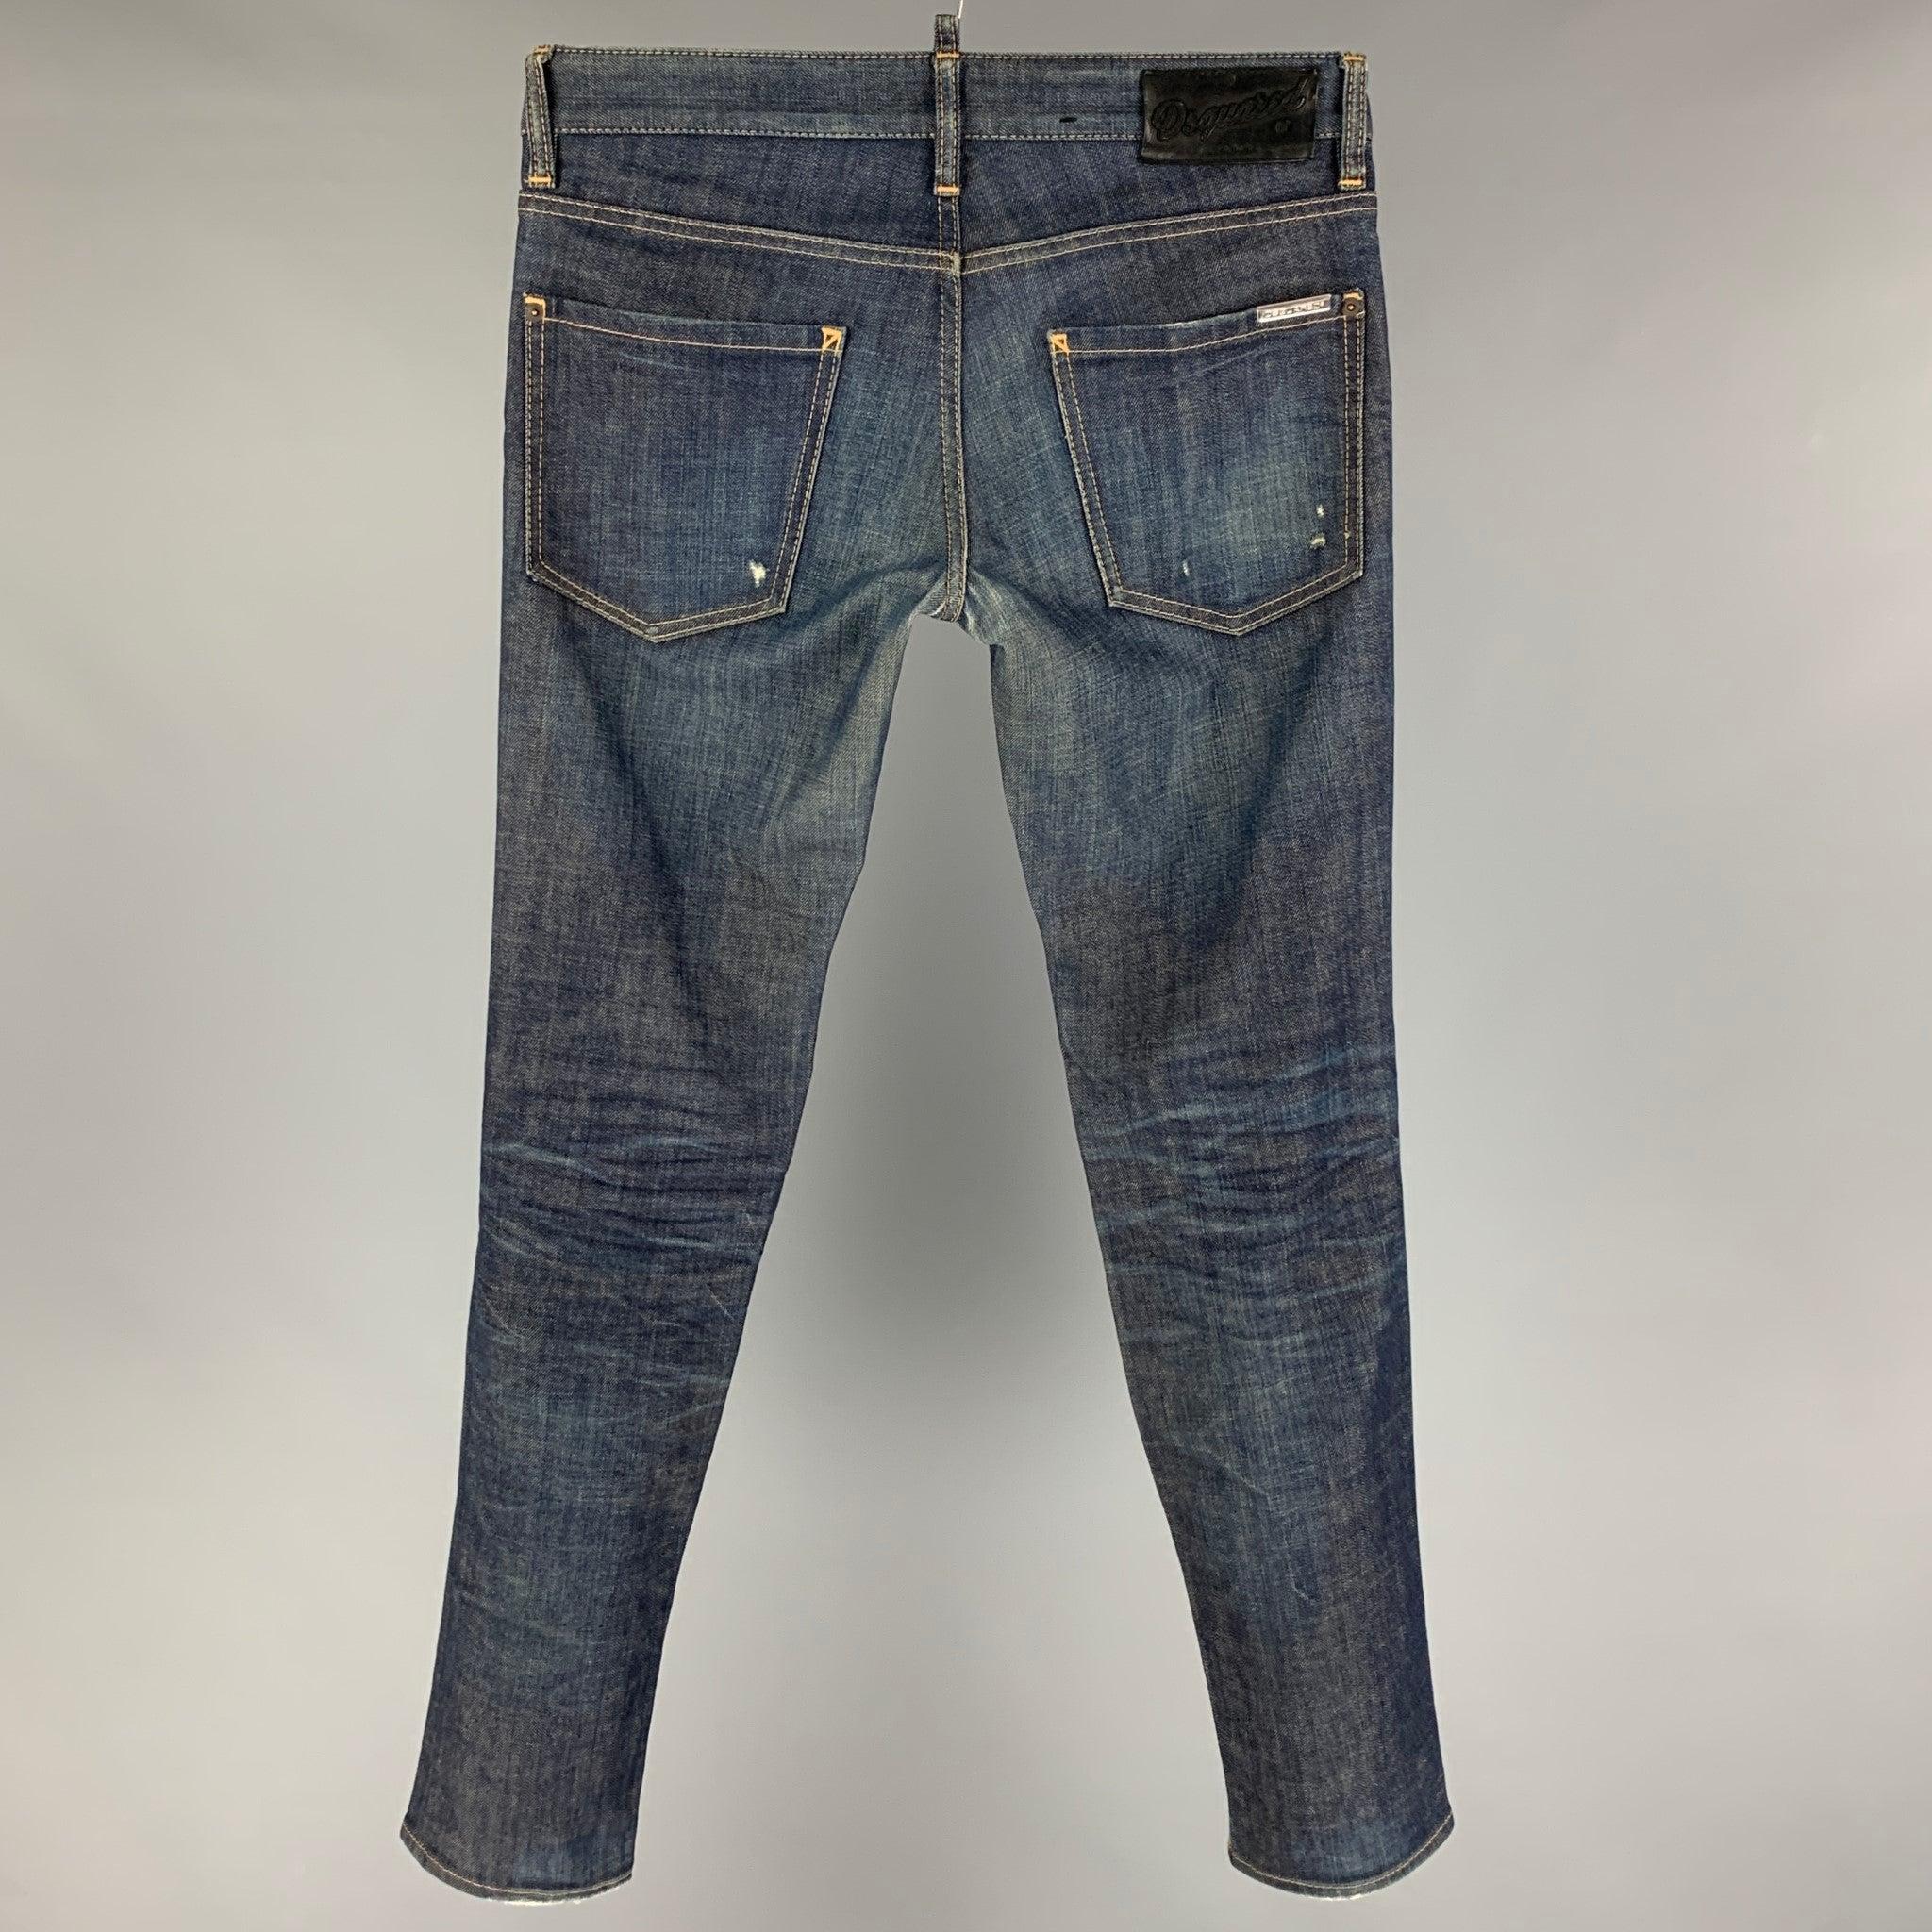 DSQUARED2 jeans comes in a indigo cotton featuring a skinny fit, contrast stitching, and a button fly closure. Made in Italy.
Very Good
Pre-Owned Condition. 

Marked:   46 

Measurements: 
  Waist: 32 inches  Rise: 8.5 inches  Inseam: 32 inches 
  
